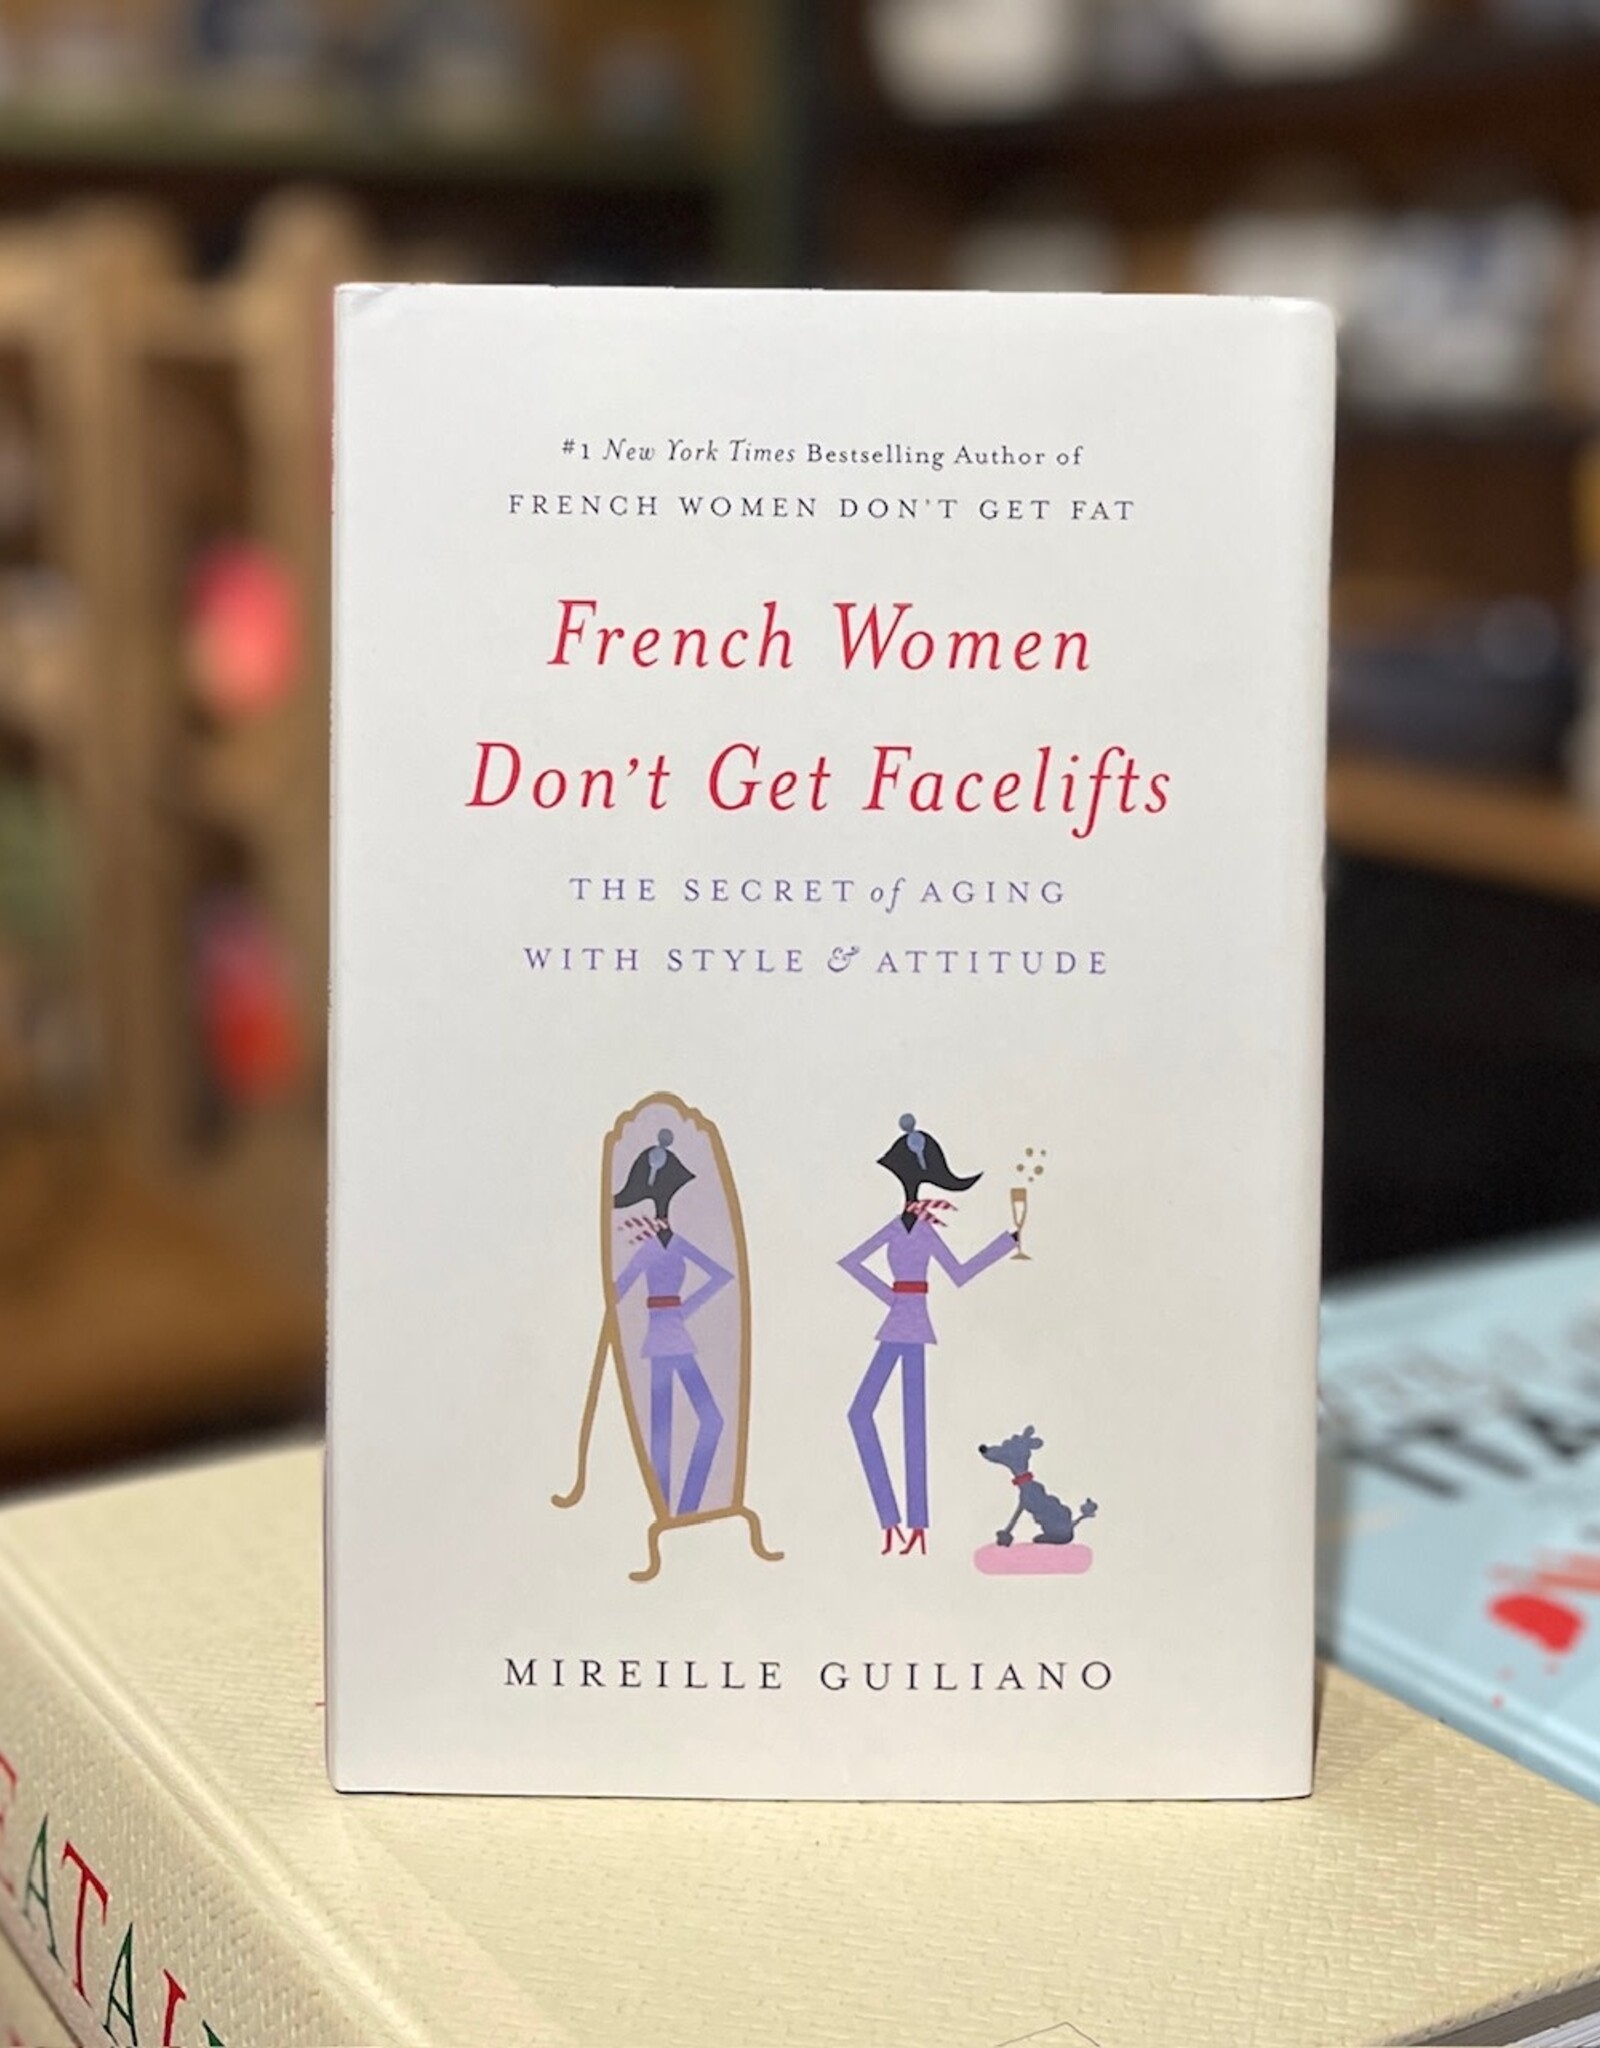 French Women Don't Get Facelifts by Mireille Guiliano